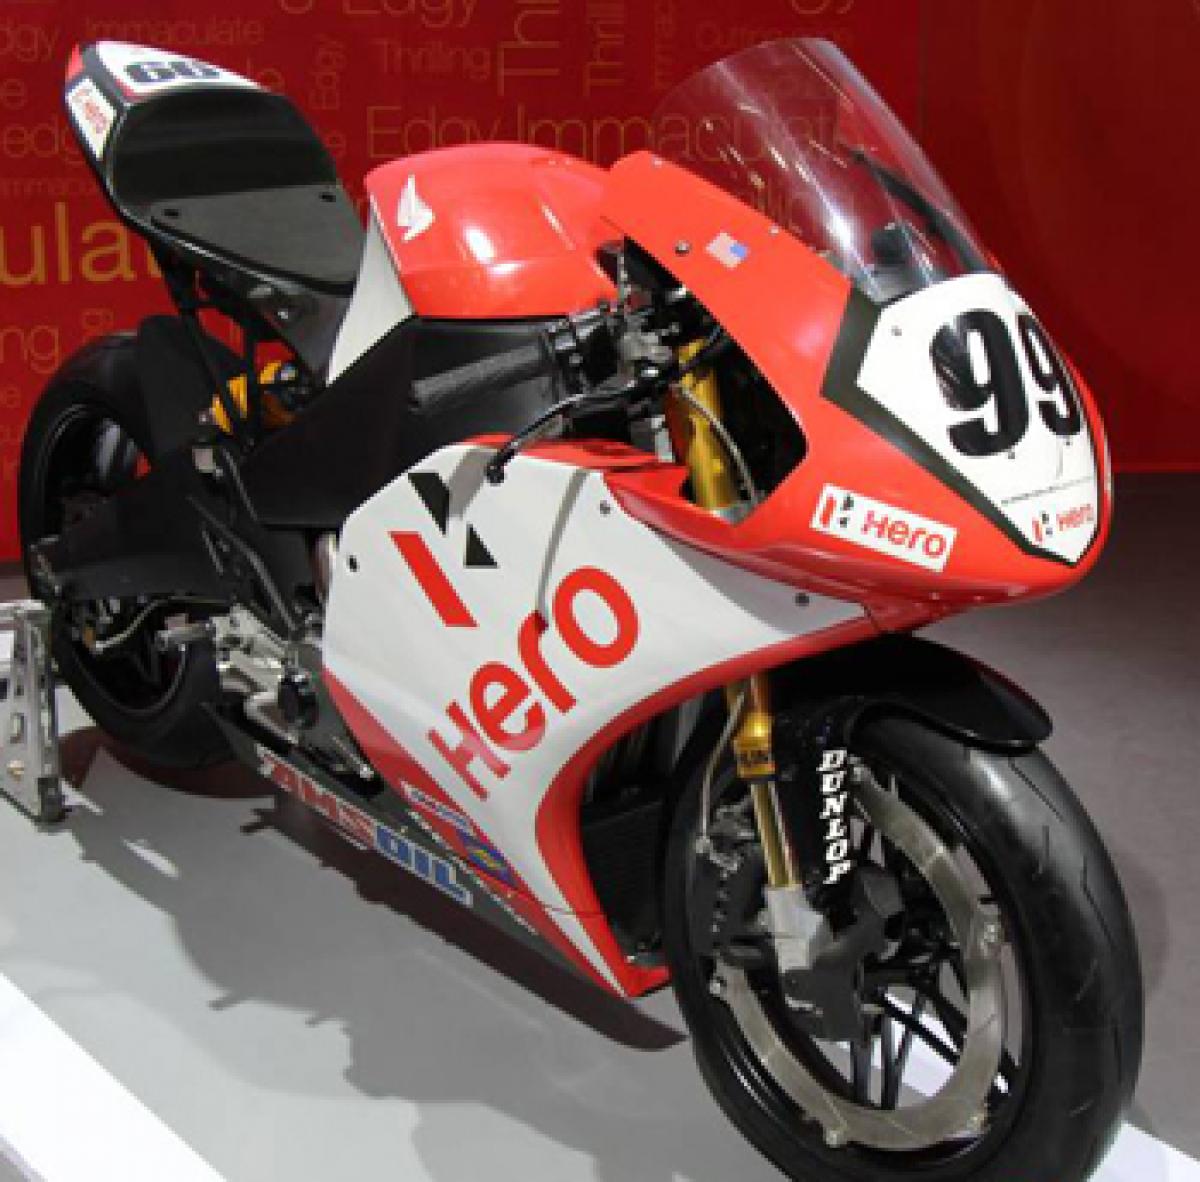 Hero MotoCorp to buy out Erik Buell Racing (EBR)